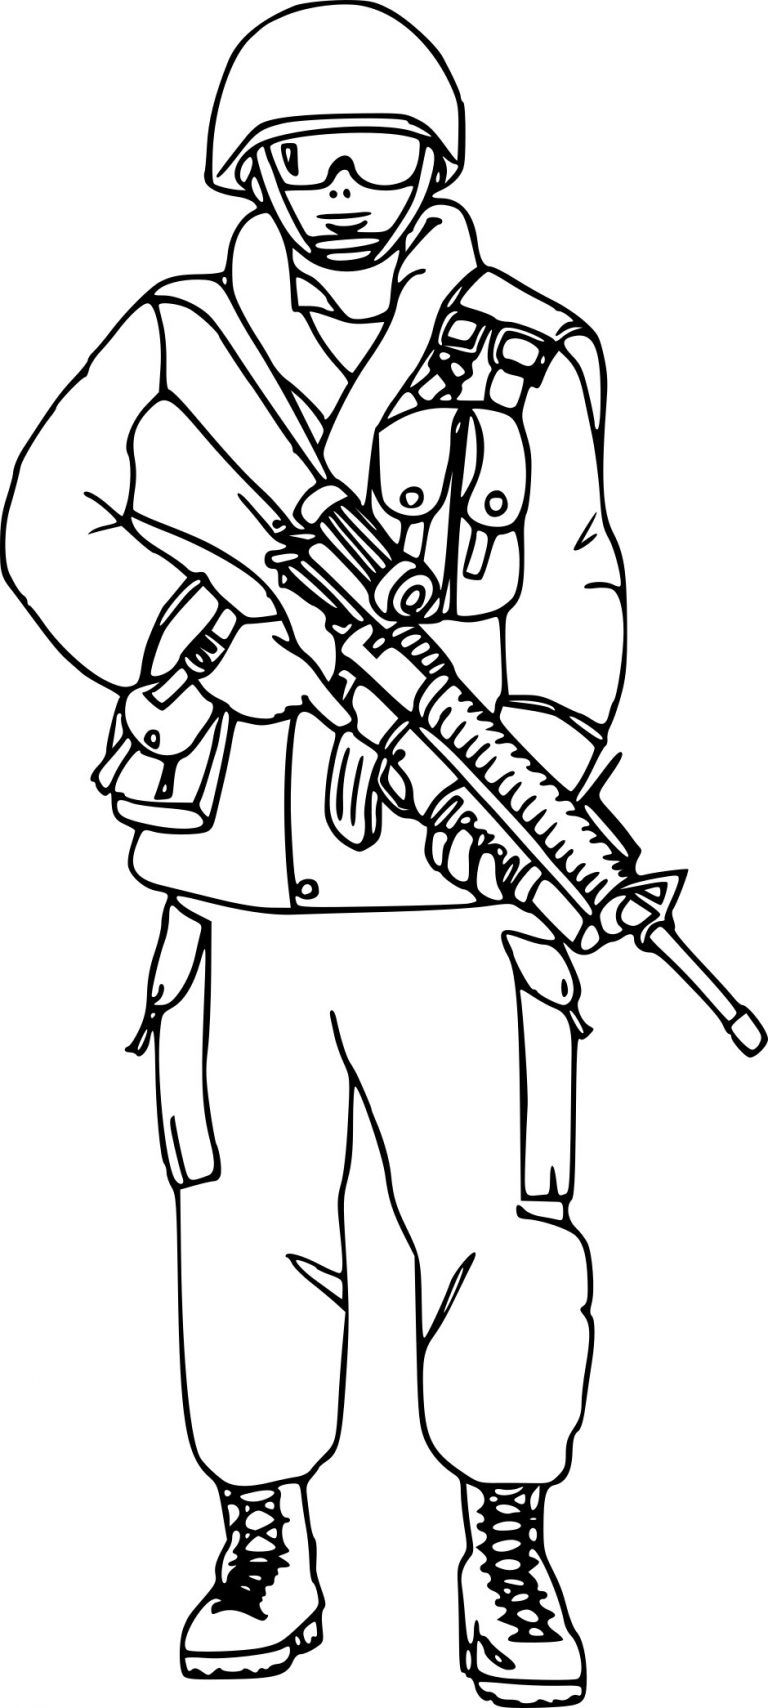 Military coloring page - free printable coloring pages on coloori.com